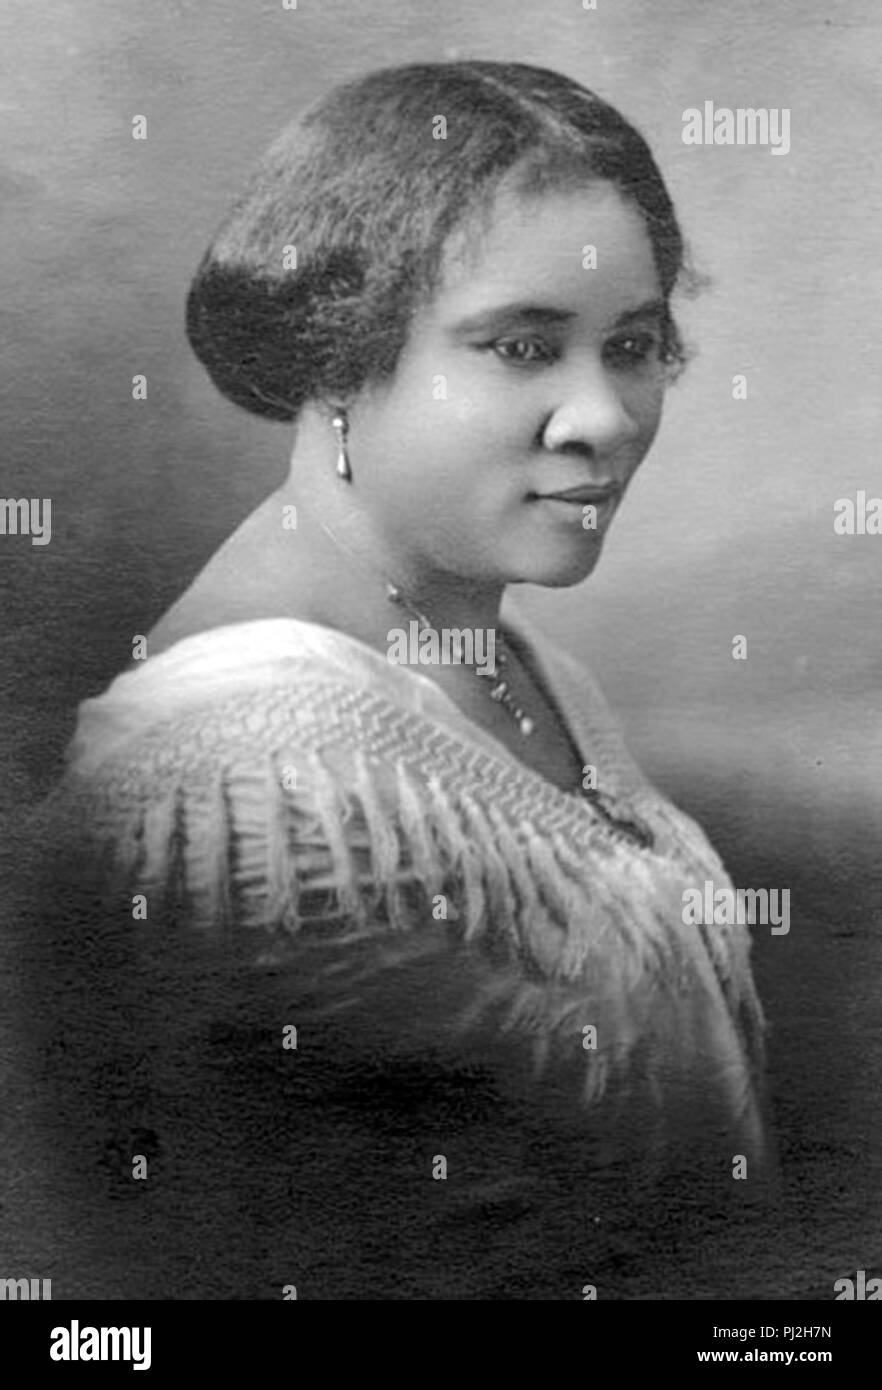 Madam C.J. Walker, the first self-made U.S. woman millionaire of any race, Sarah Breedlove (1867 – 1919), known as Madam C. J. Walker, African-American entrepreneur and the first female self-made millionaire in the United States Stock Photo